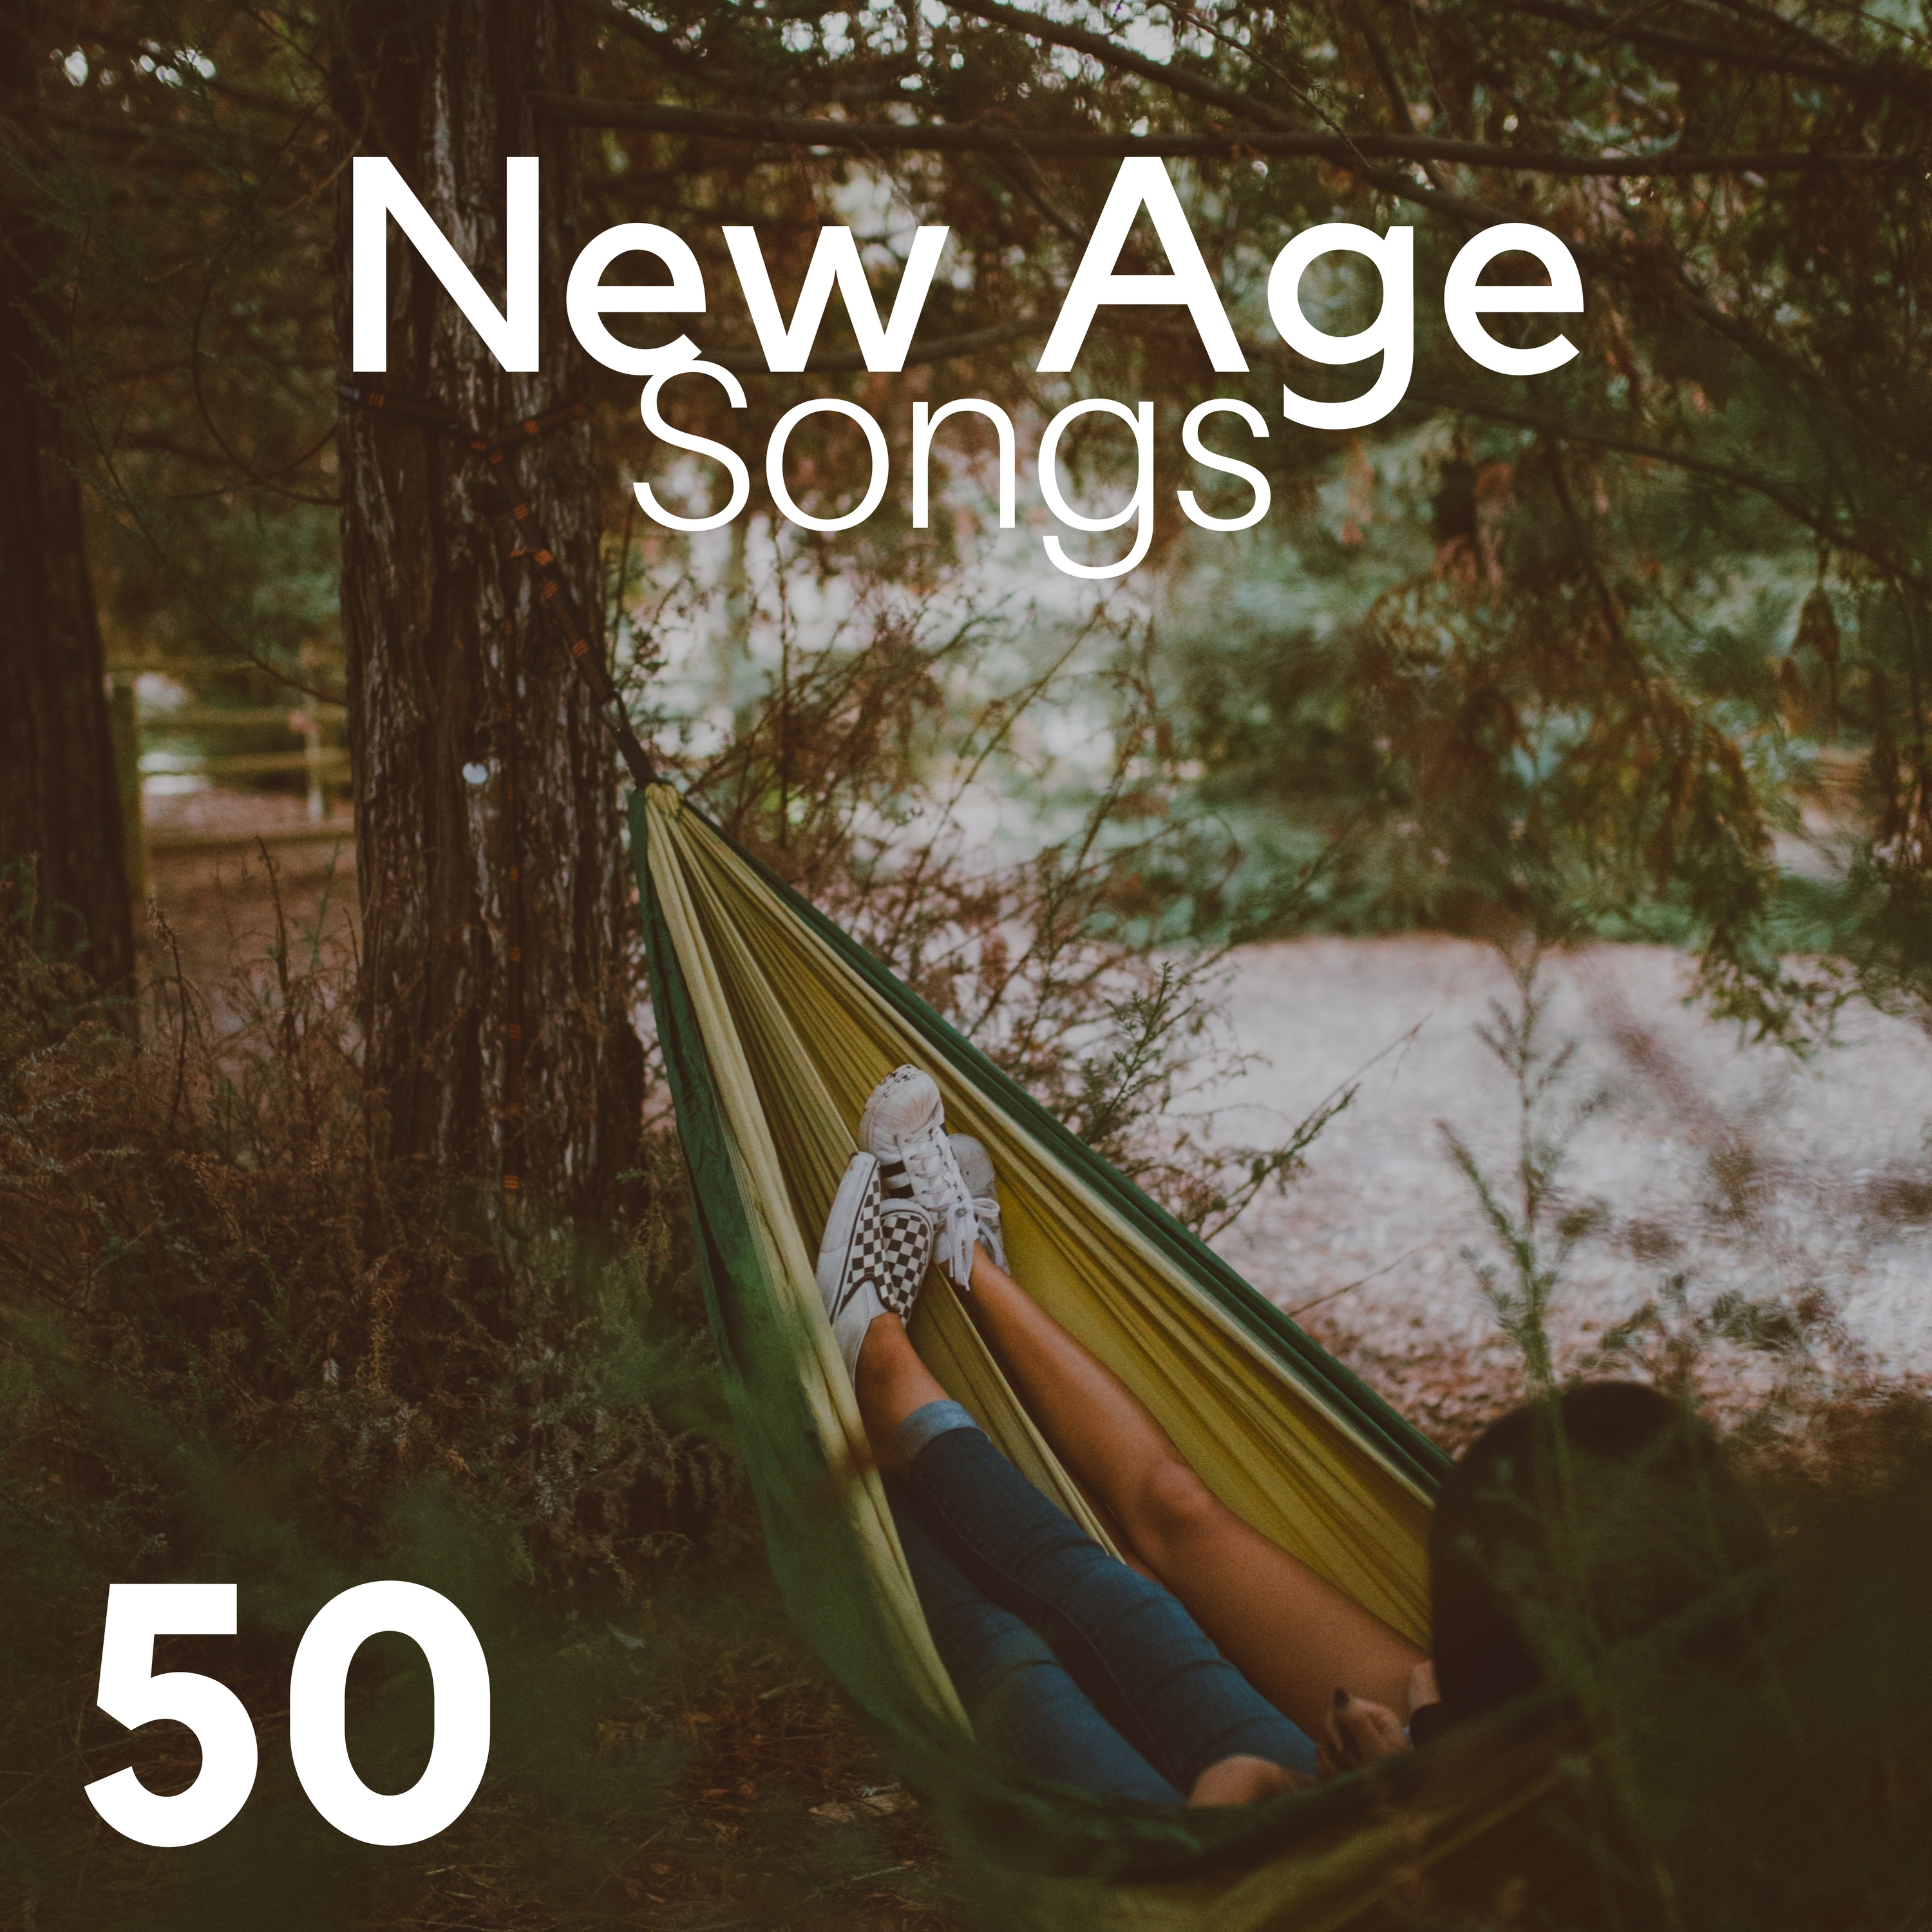 50 New Age Songs - The Best Relaxing & Soothing Music for Meditation & Stress Reduction, Sounds for Relaxation, Relaxation Therapy, Serenity